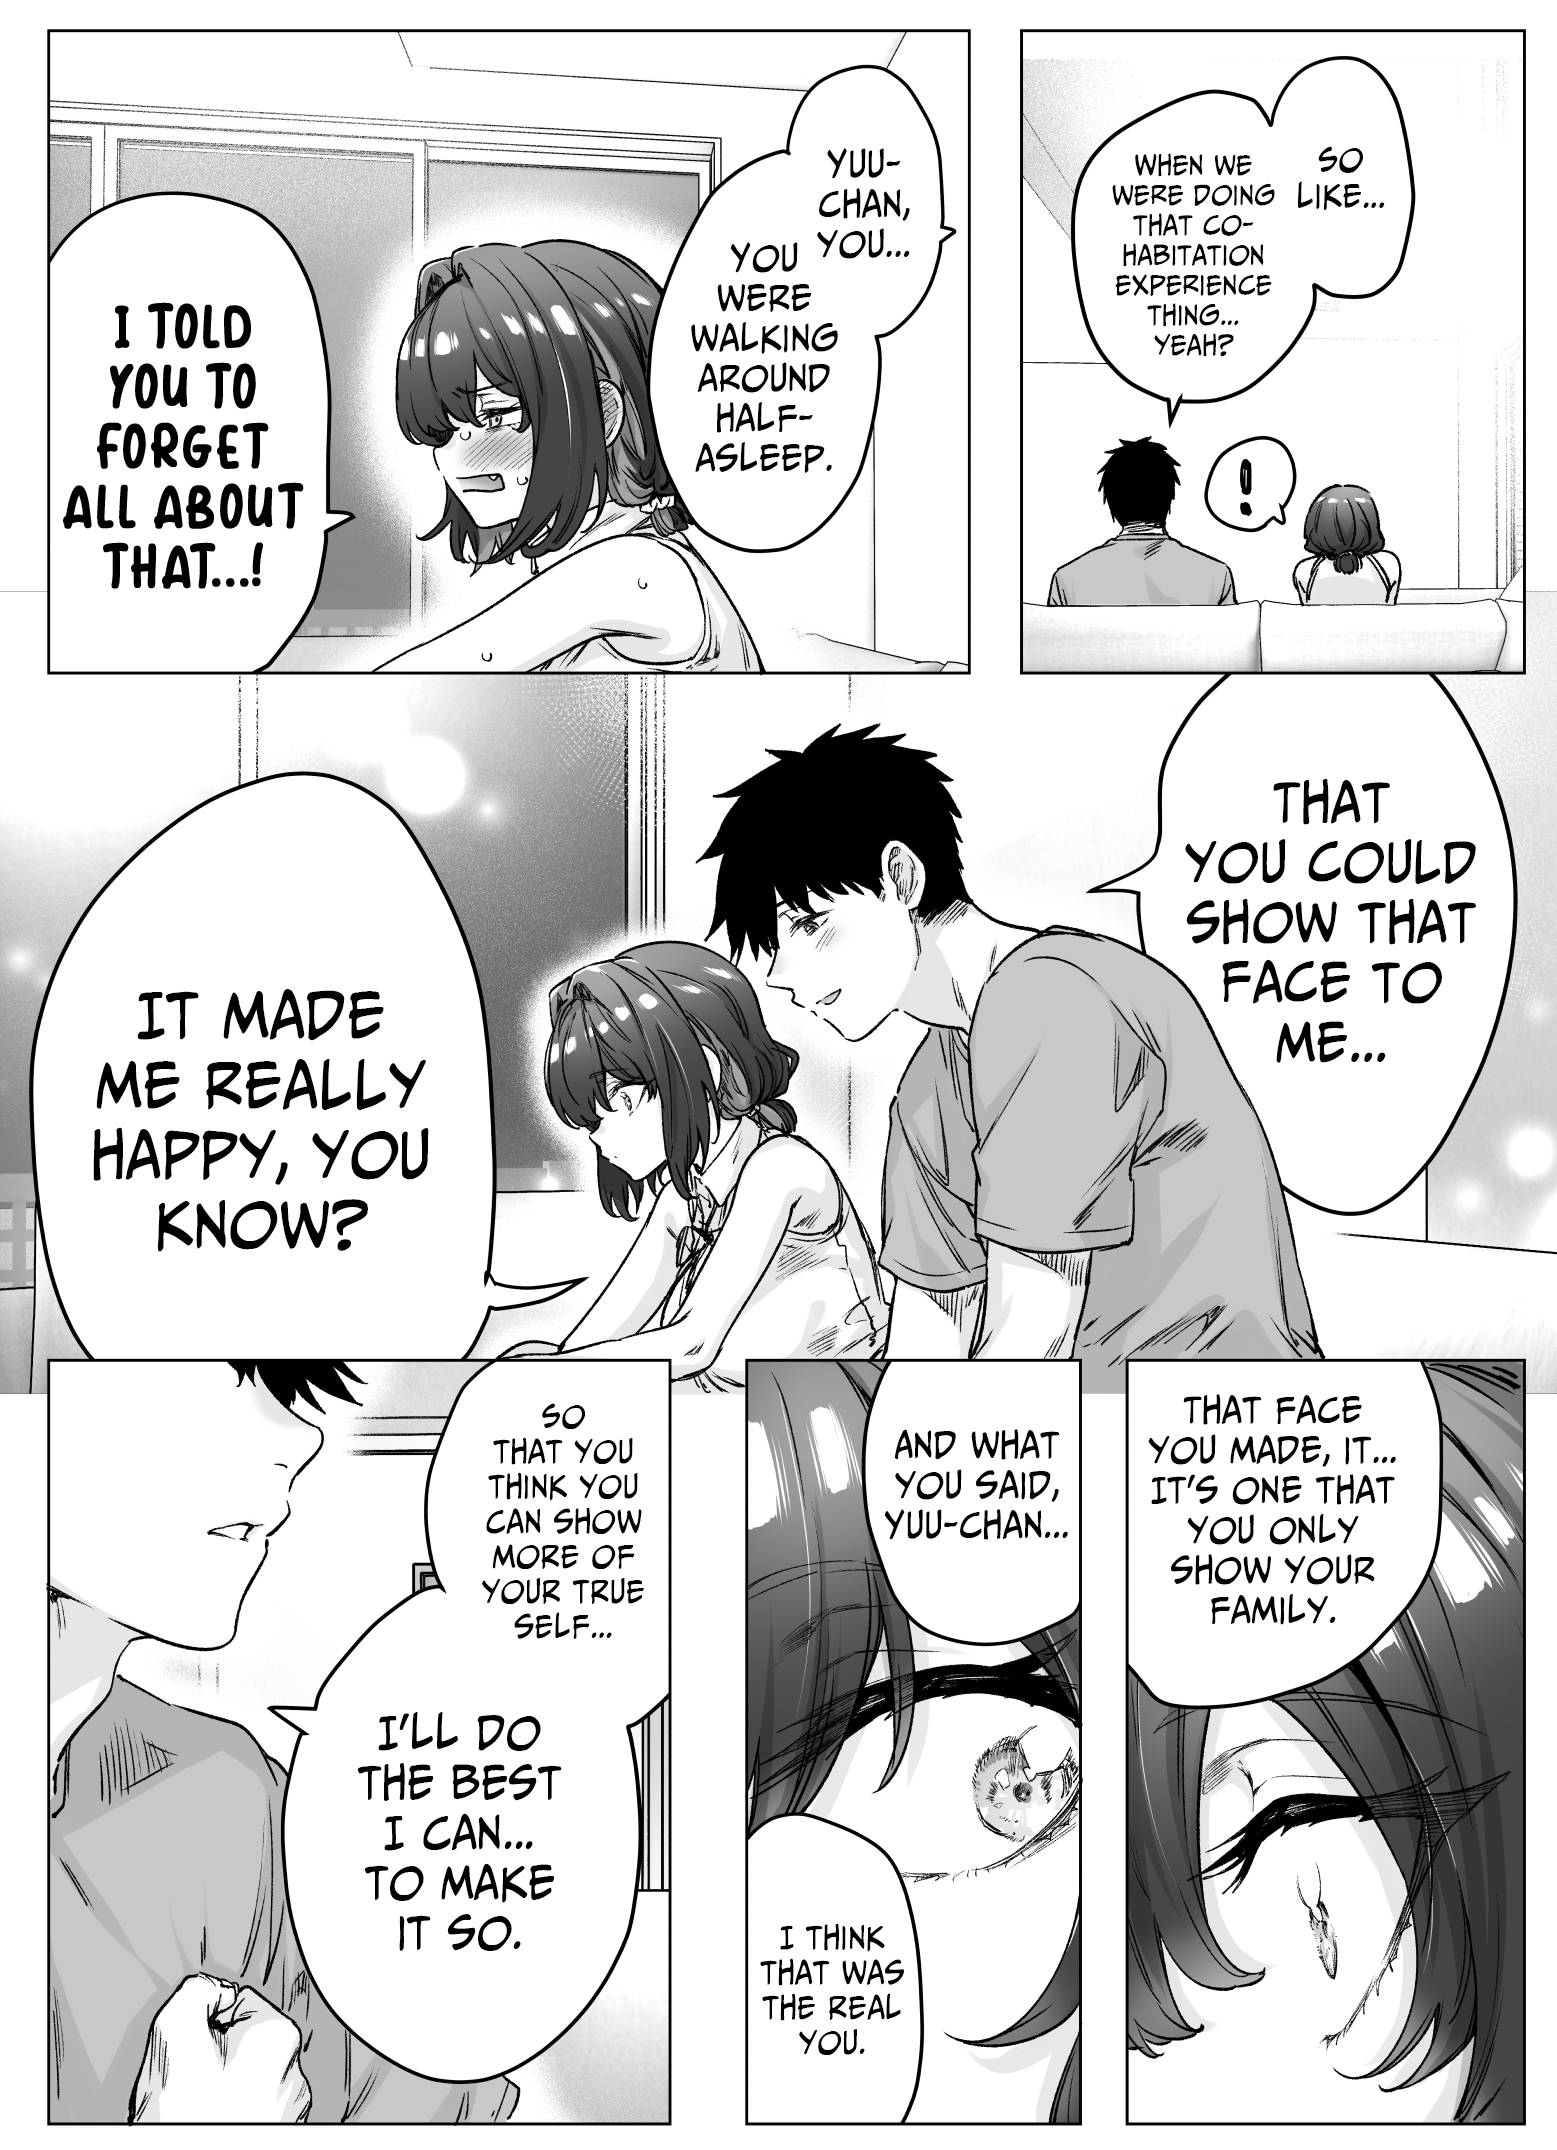 The Tsuntsuntsuntsuntsuntsuntsuntsuntsuntsuntsundere Girl Getting Less and Less Tsun Day by Day - chapter 87 - #2